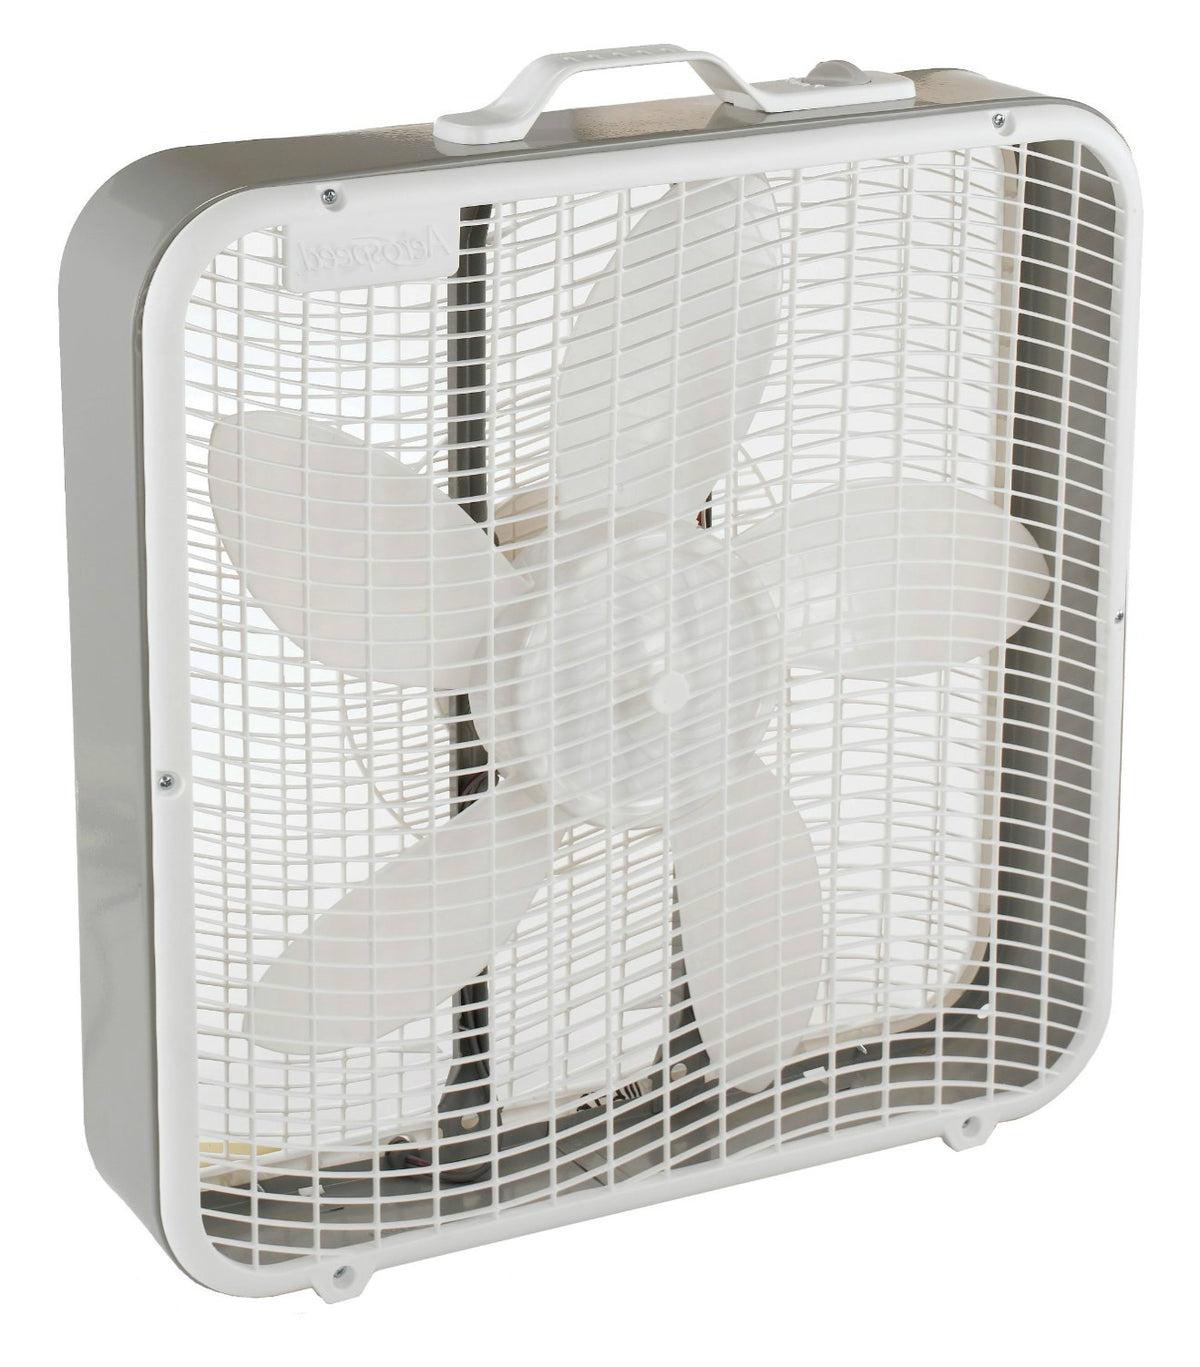 Buy aerospeed bx100 - Online store for venting & fans, box fans in USA, on sale, low price, discount deals, coupon code